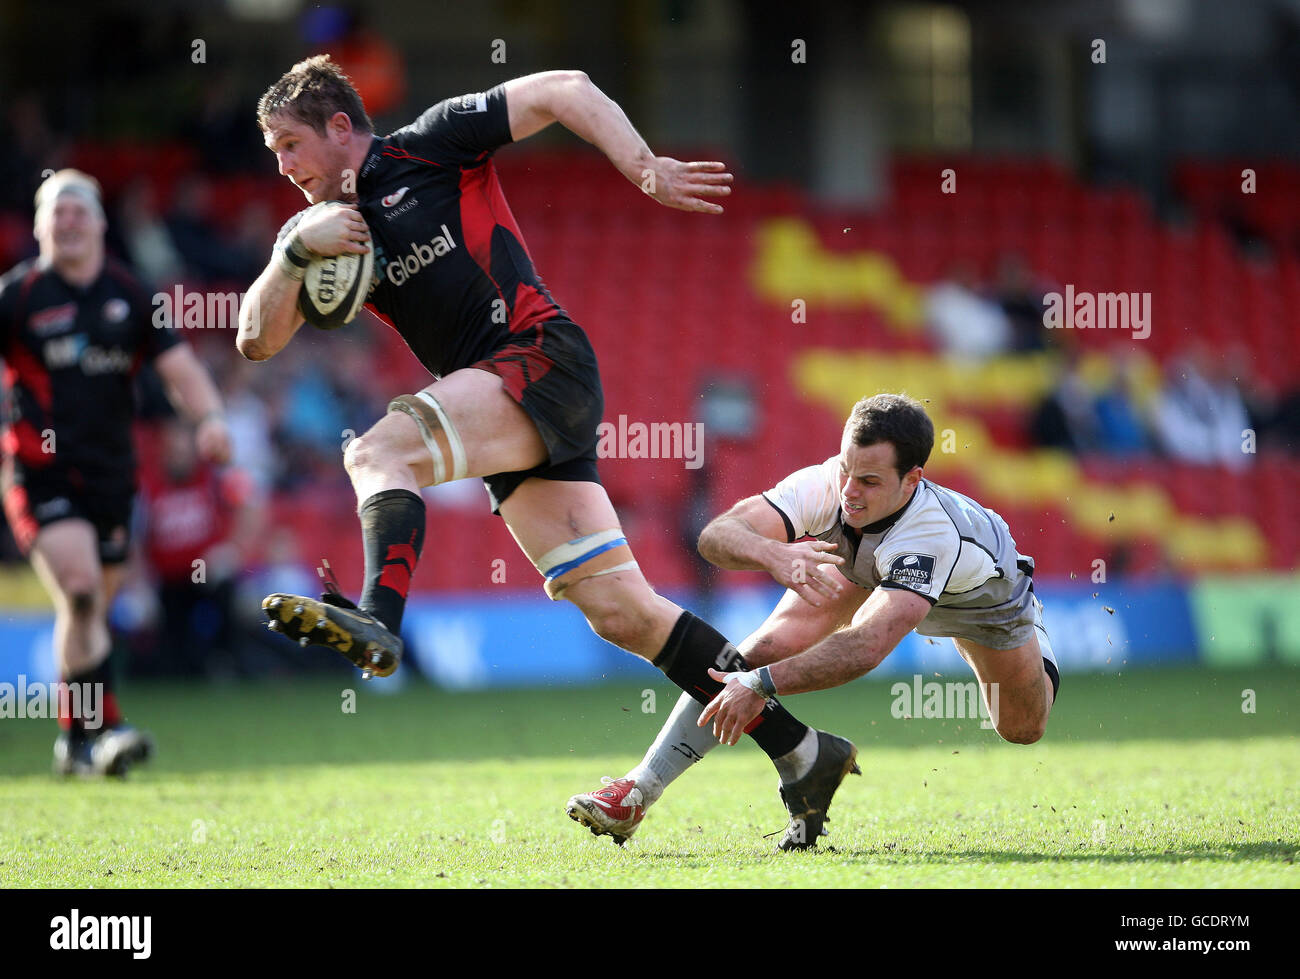 Rugby Union - Guinness Premiership - Saracens v Newcastle Falcons - Vicarage Road. Saracens' Ernst Joubert gets away from Newcastel Falcons' Micky Young to score another try Stock Photo